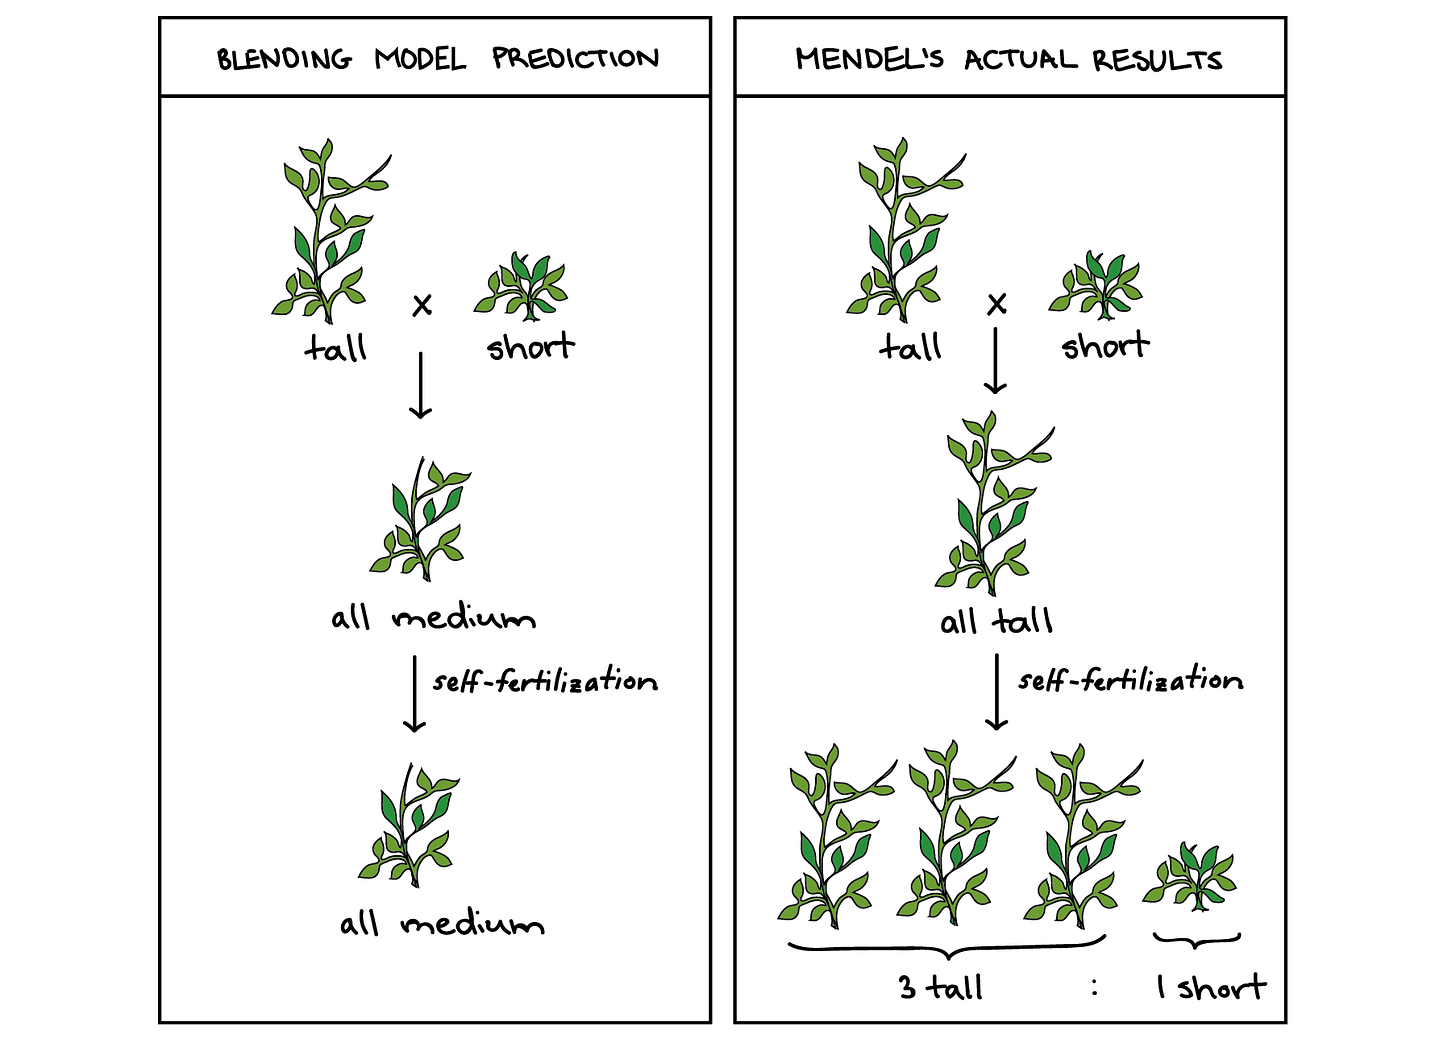 Mendel and his peas (article) | Heredity | Khan Academy